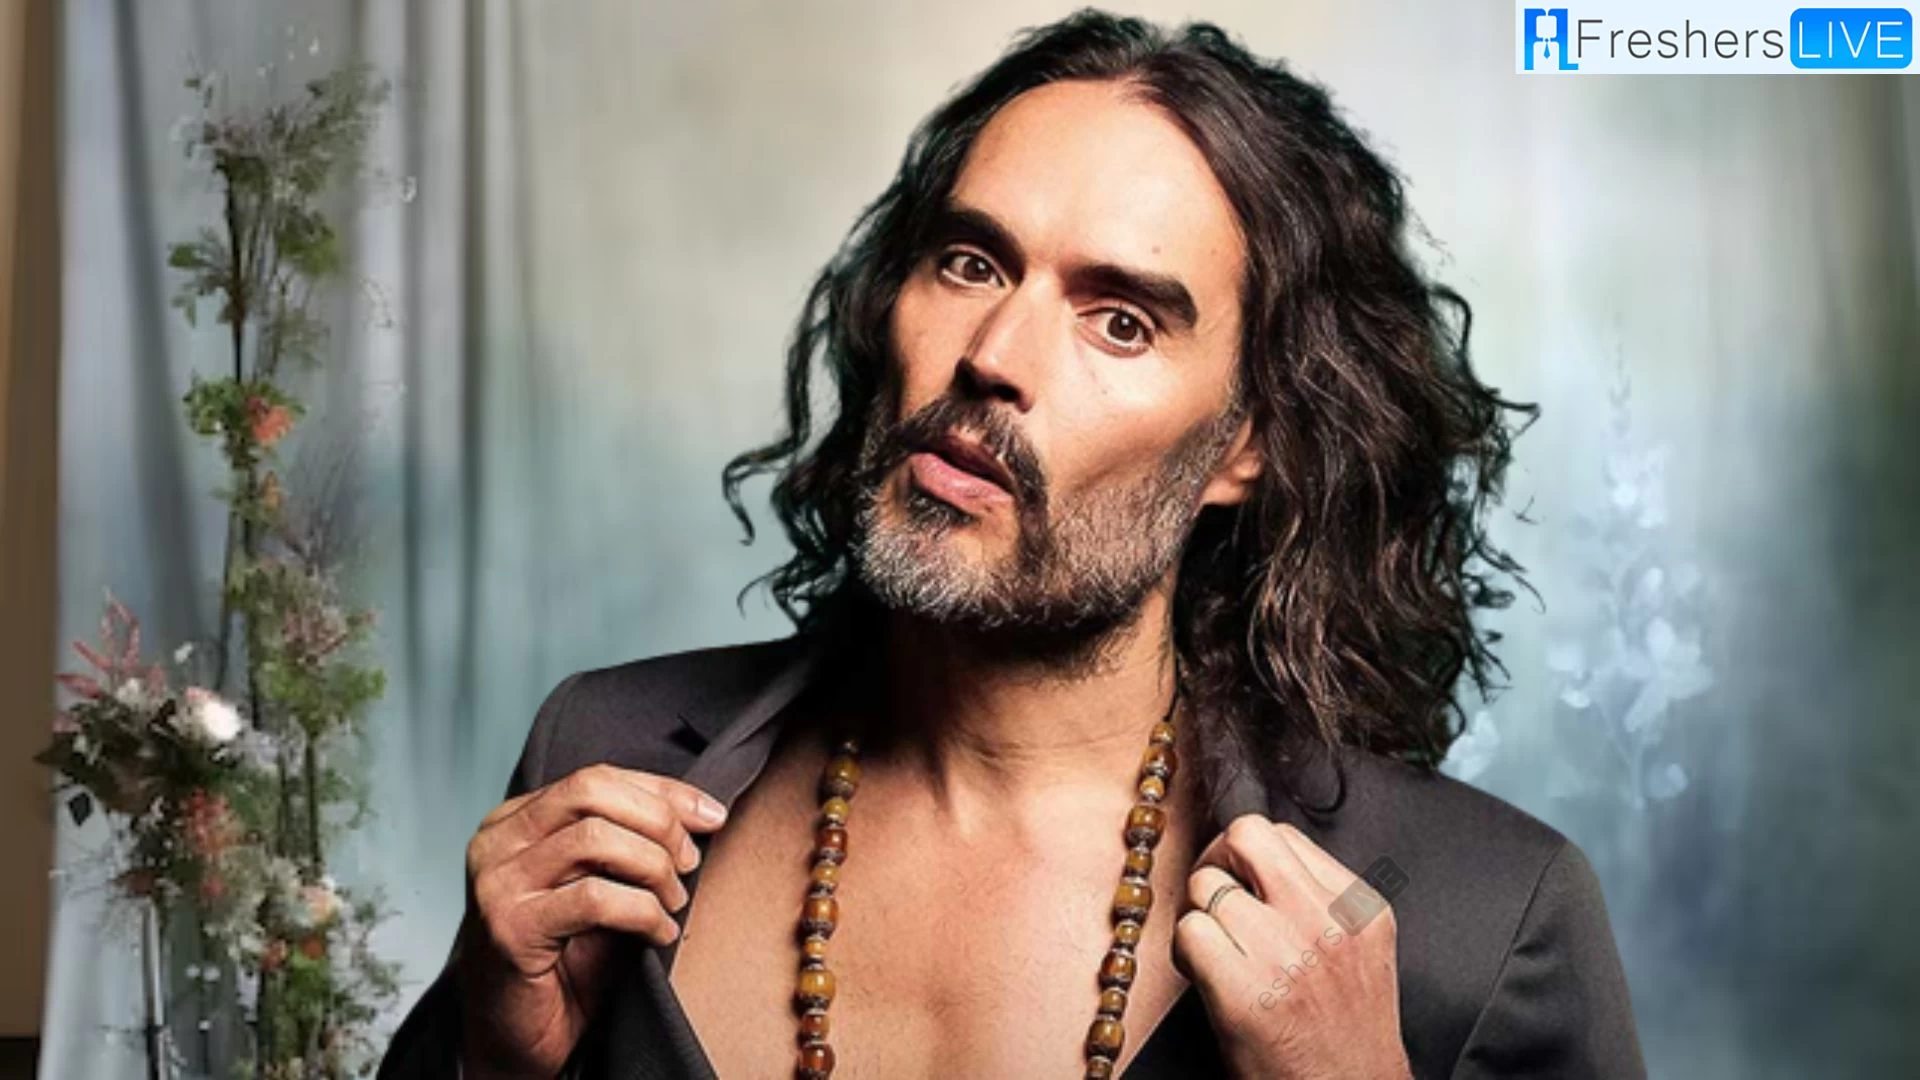 Does Russell Brand Have Kids? Who is Russell Brand? Russell Brand's Age, Family, Parents and More